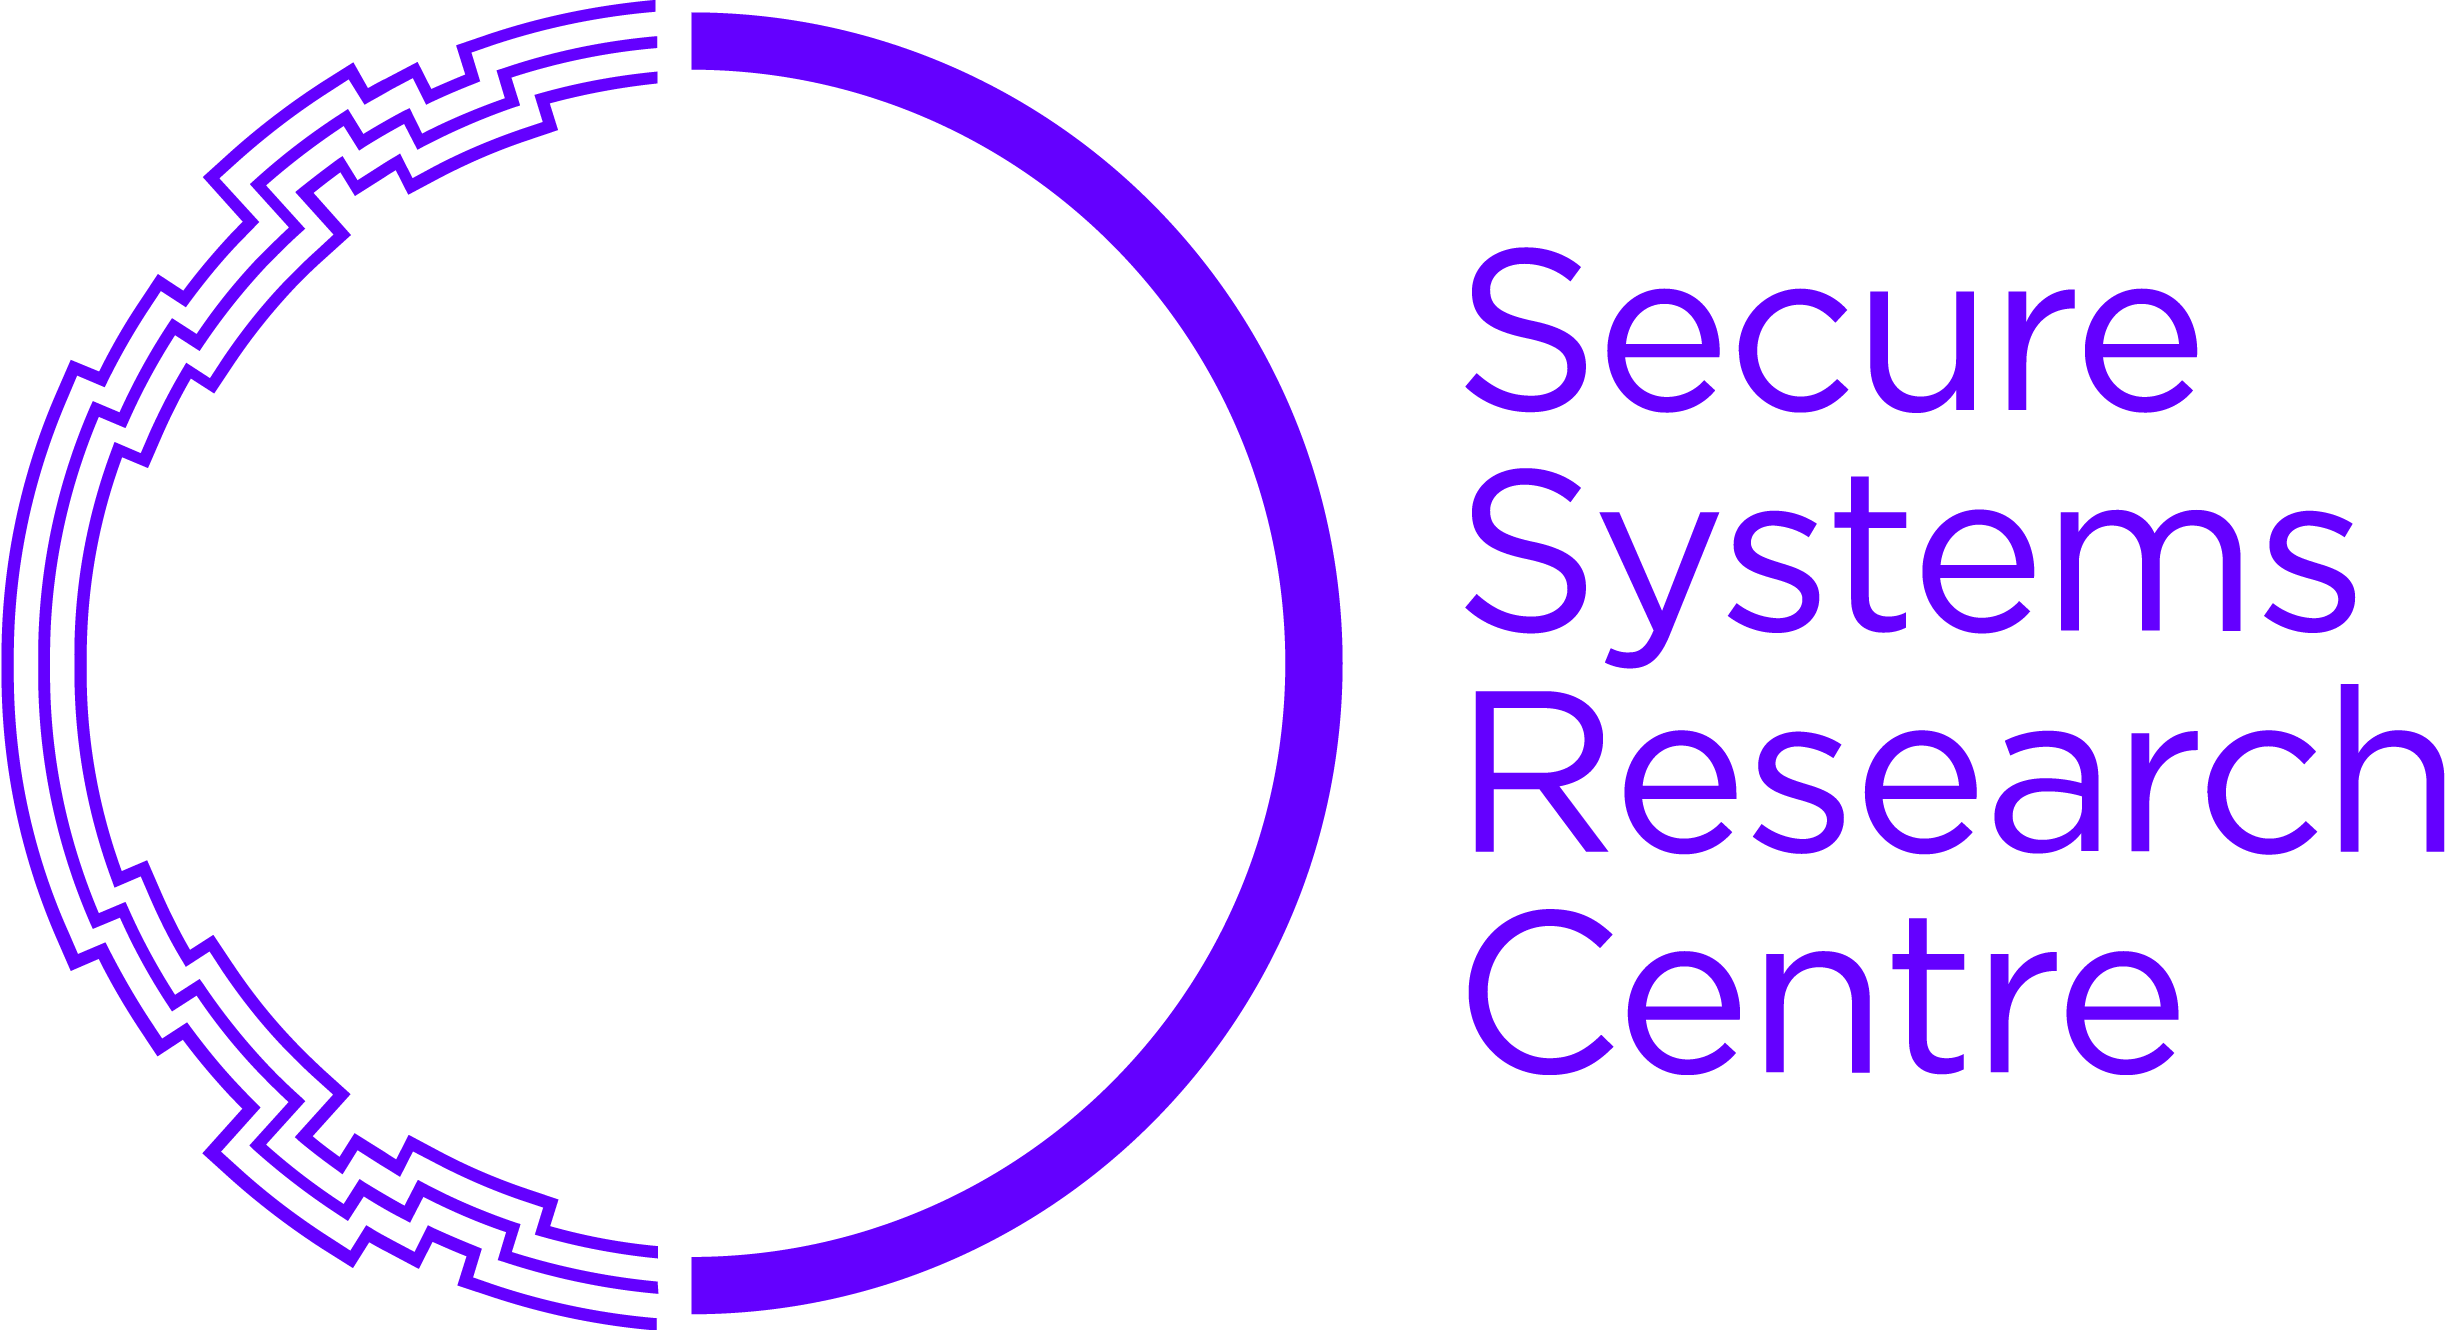 Image for Abu Dhabi’s Technology Innovation Institute Appoints International Experts To Board Of Advisors At Secure Systems Research Centre